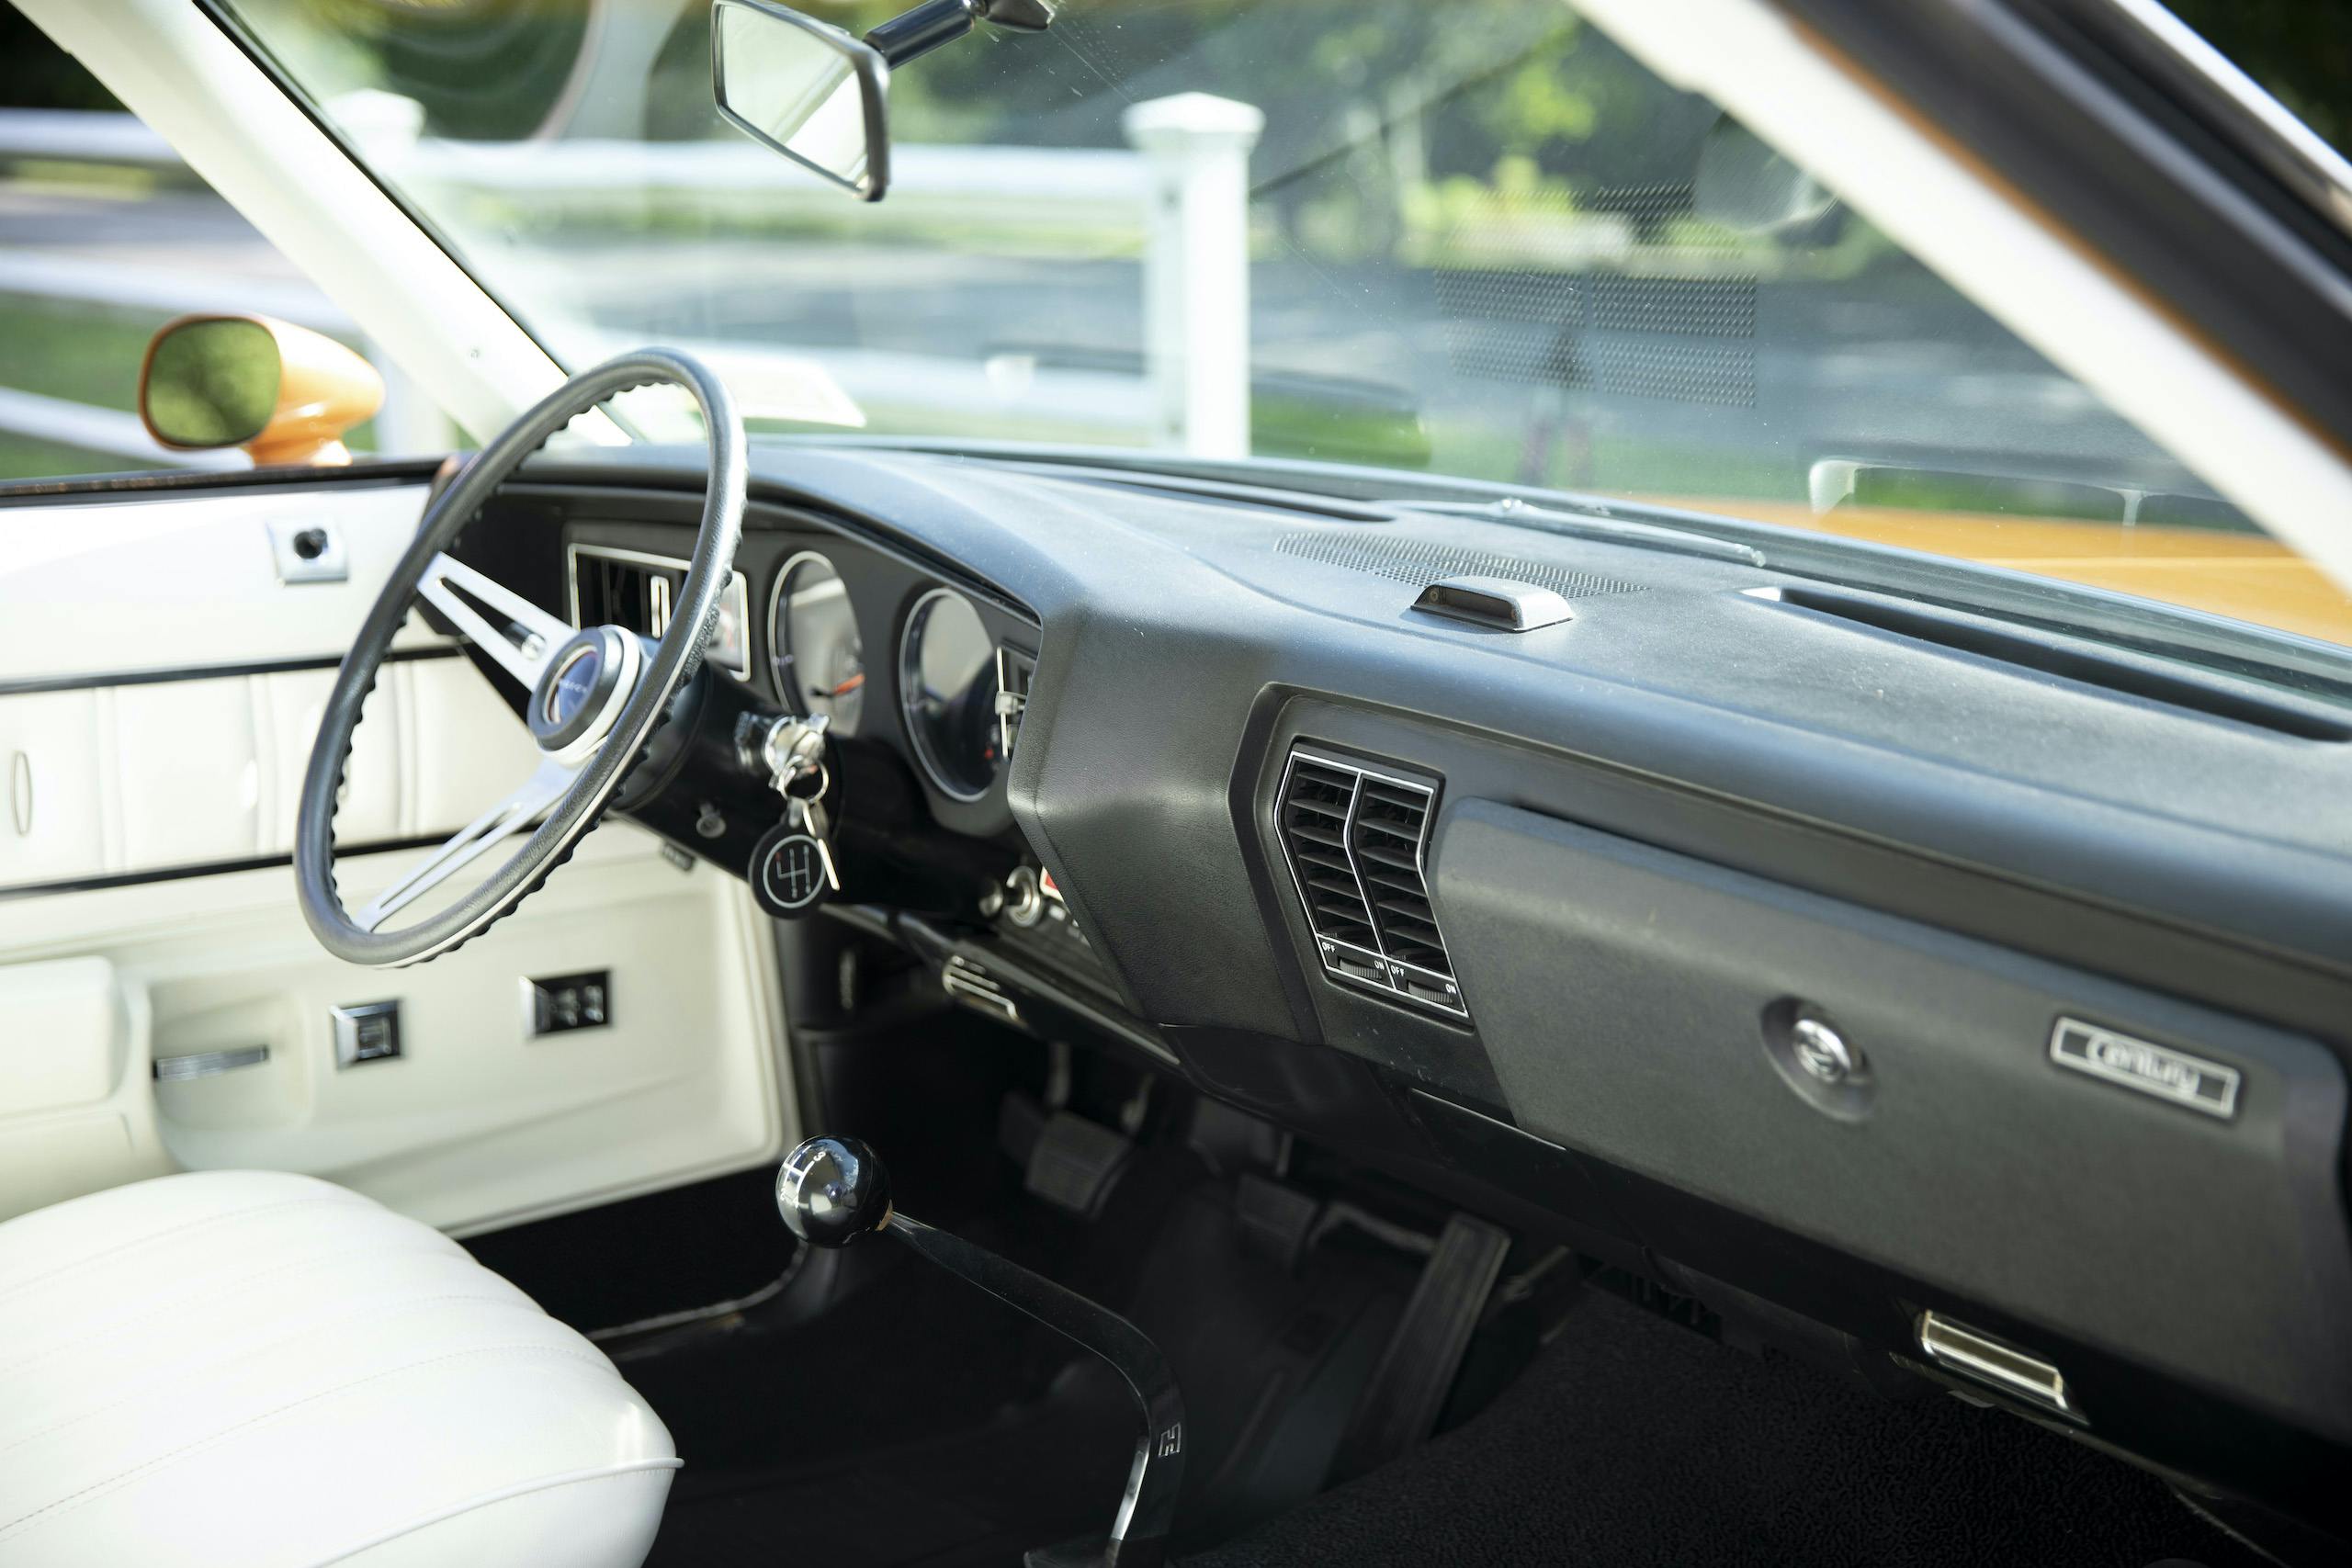 1973 Buick GS Stage 1 gran sport coupe front interior